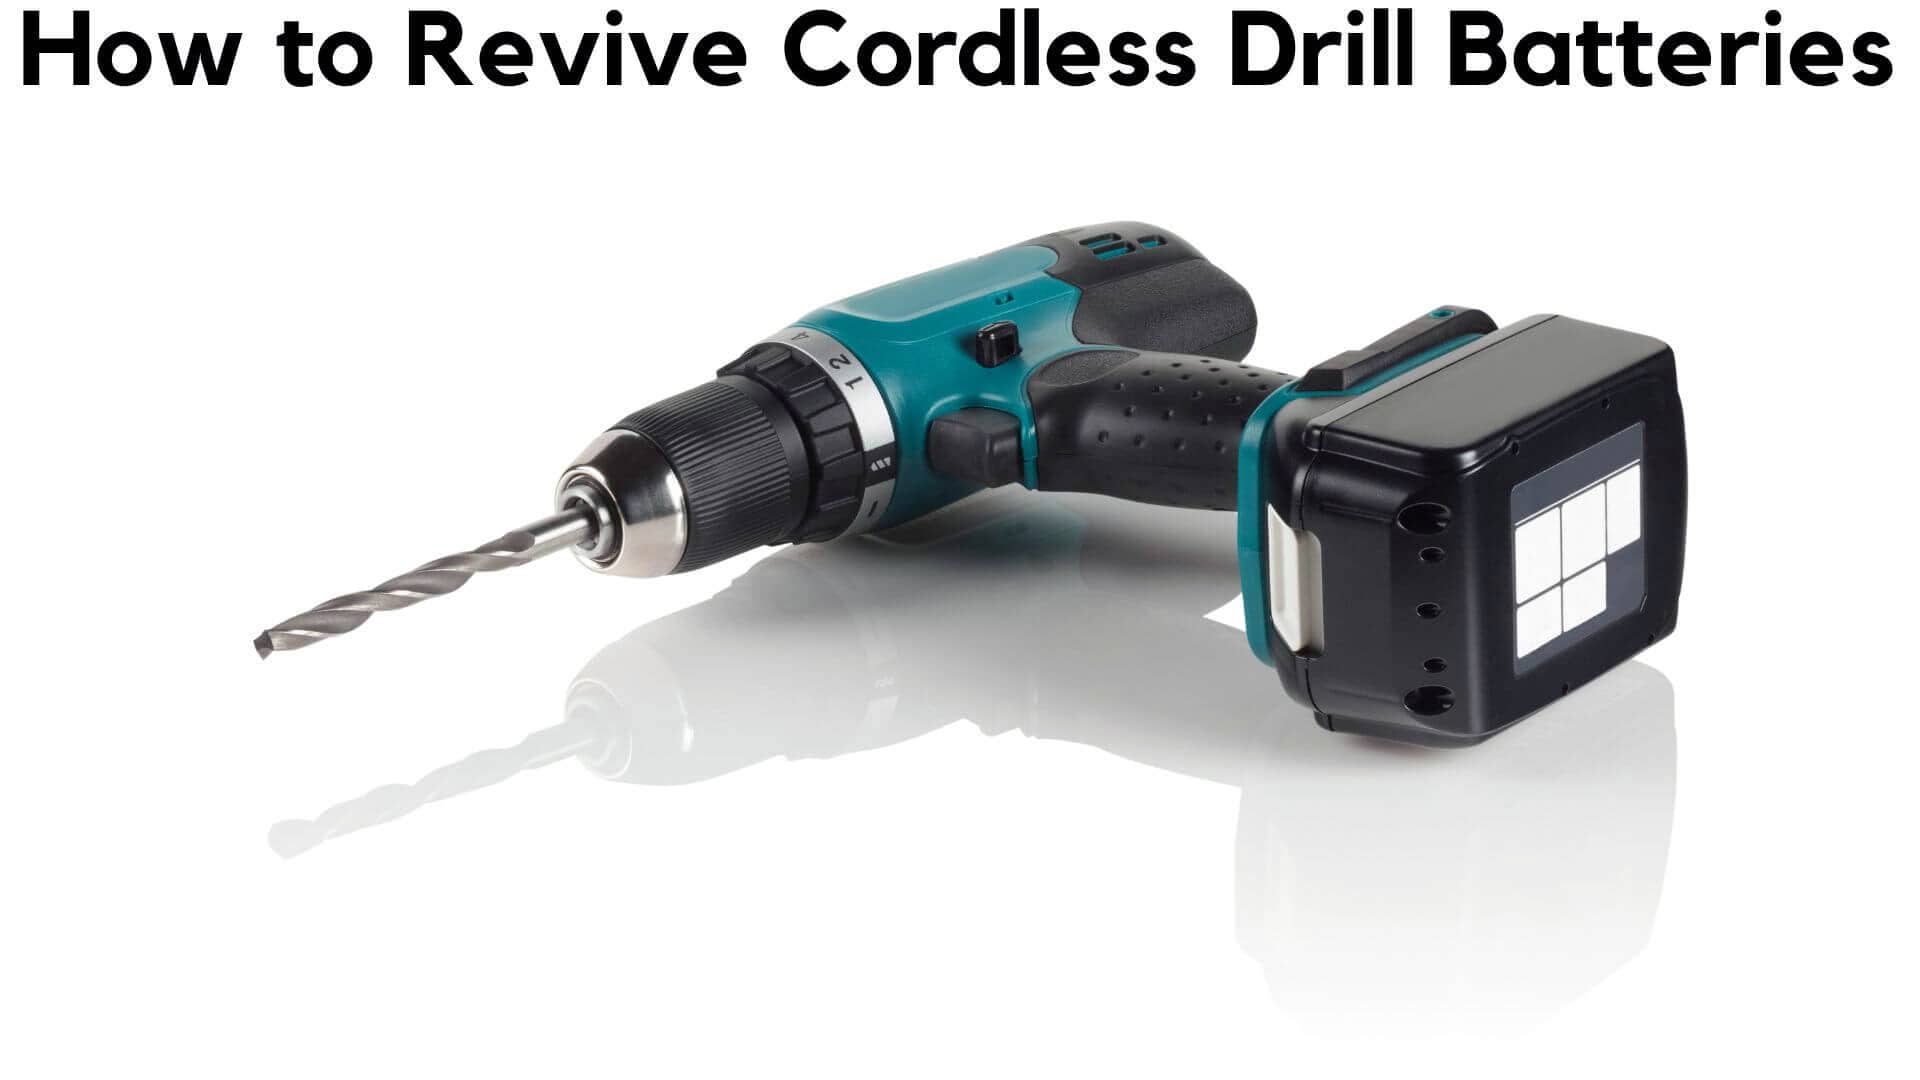 How to Revive Cordless Drill Batteries